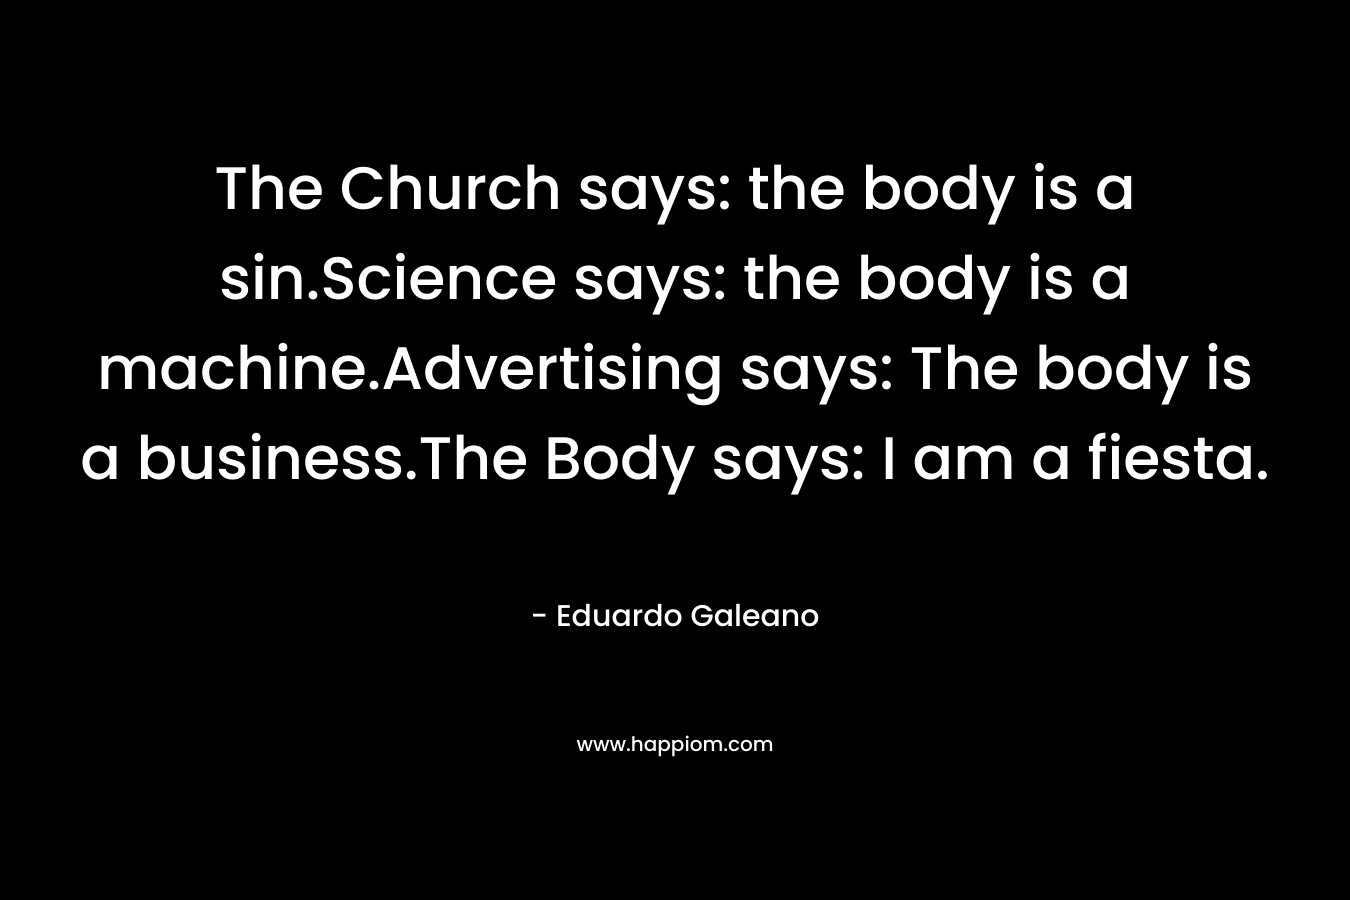 The Church says: the body is a sin.Science says: the body is a machine.Advertising says: The body is a business.The Body says: I am a fiesta. – Eduardo Galeano